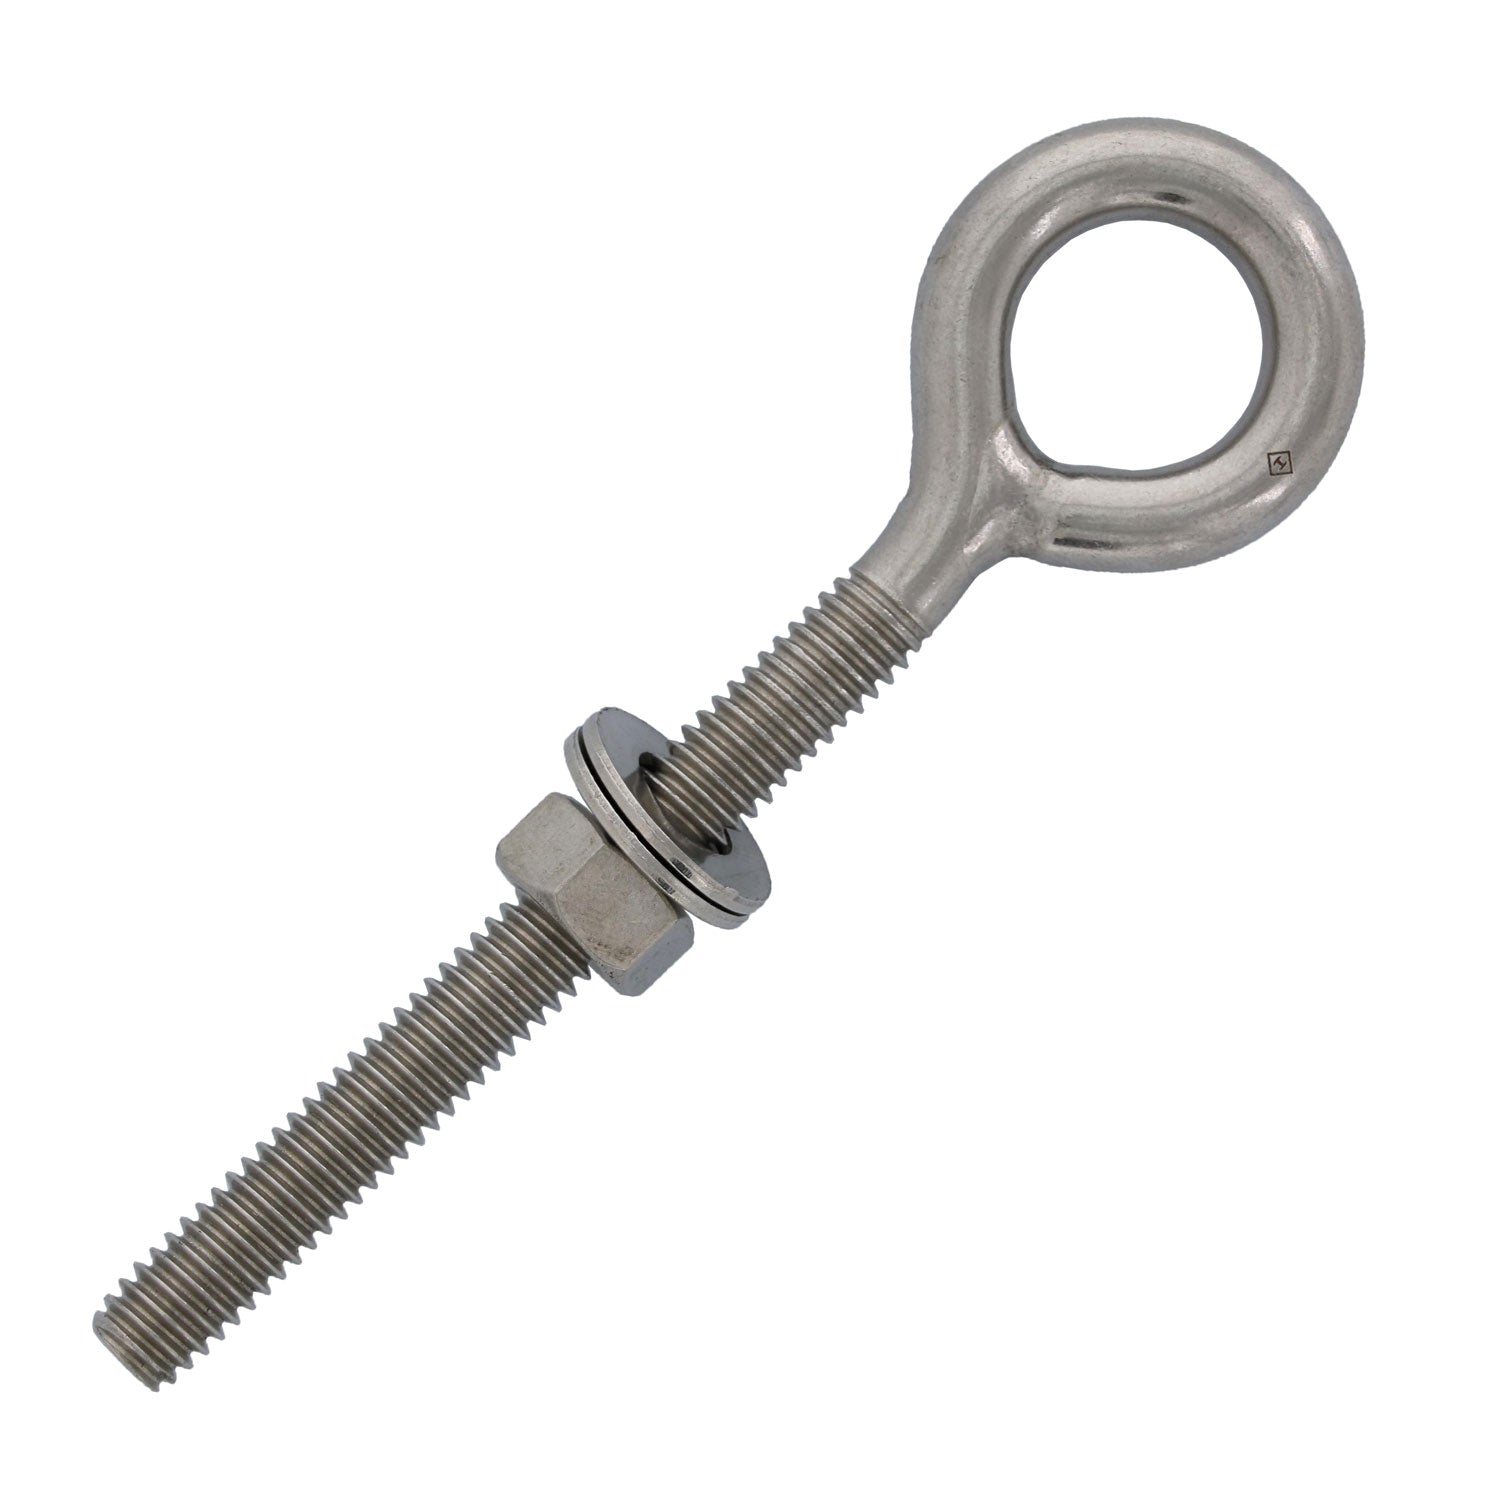 1/2 inch D Ring Bolt On 2-1/2 x 2-3/8 inches